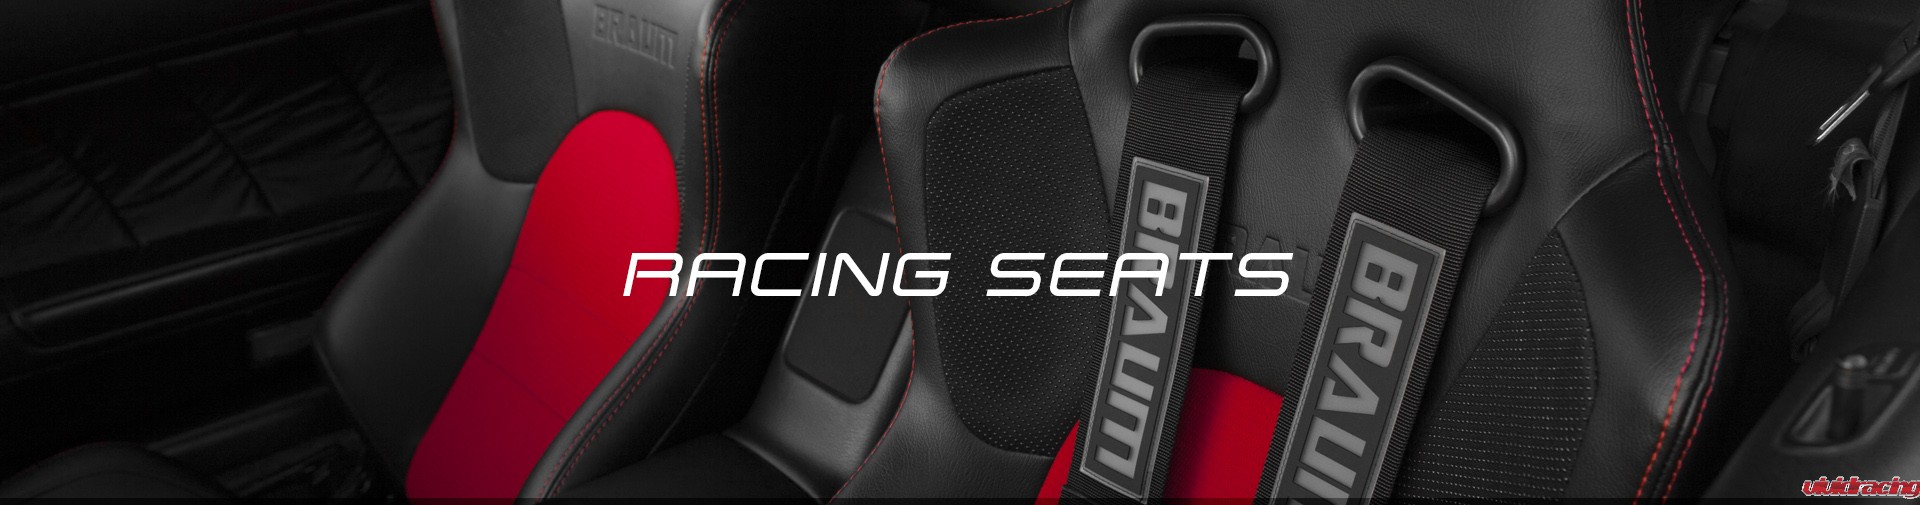 universal_racing_seat_category